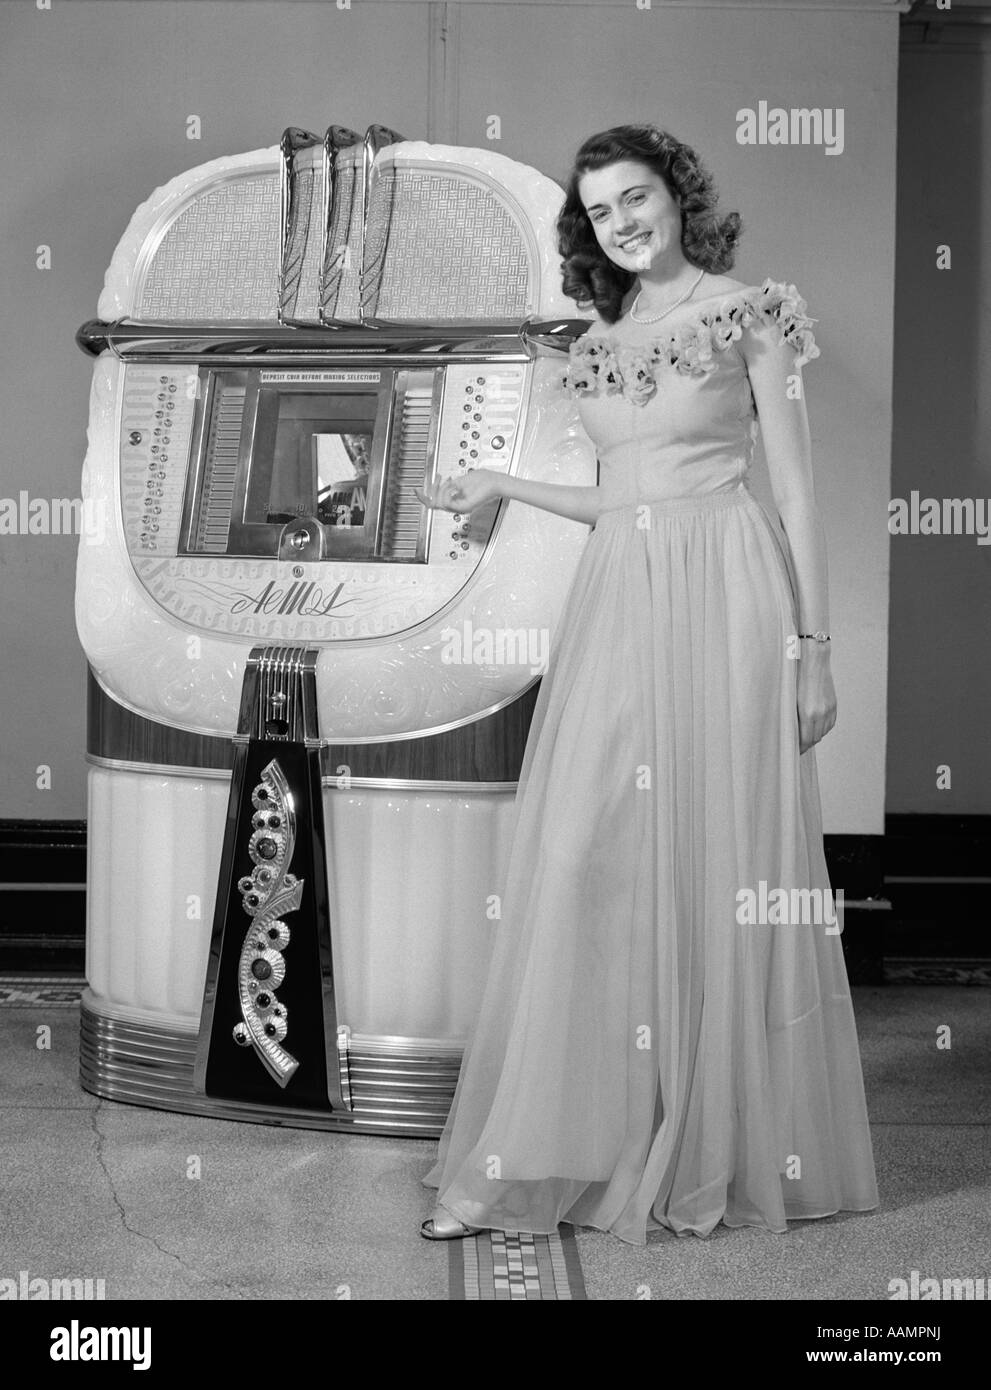 1940s PORTRAIT OF WOMAN IN BALL GOWN IN FRONT OF JUKEBOX Stock Photo